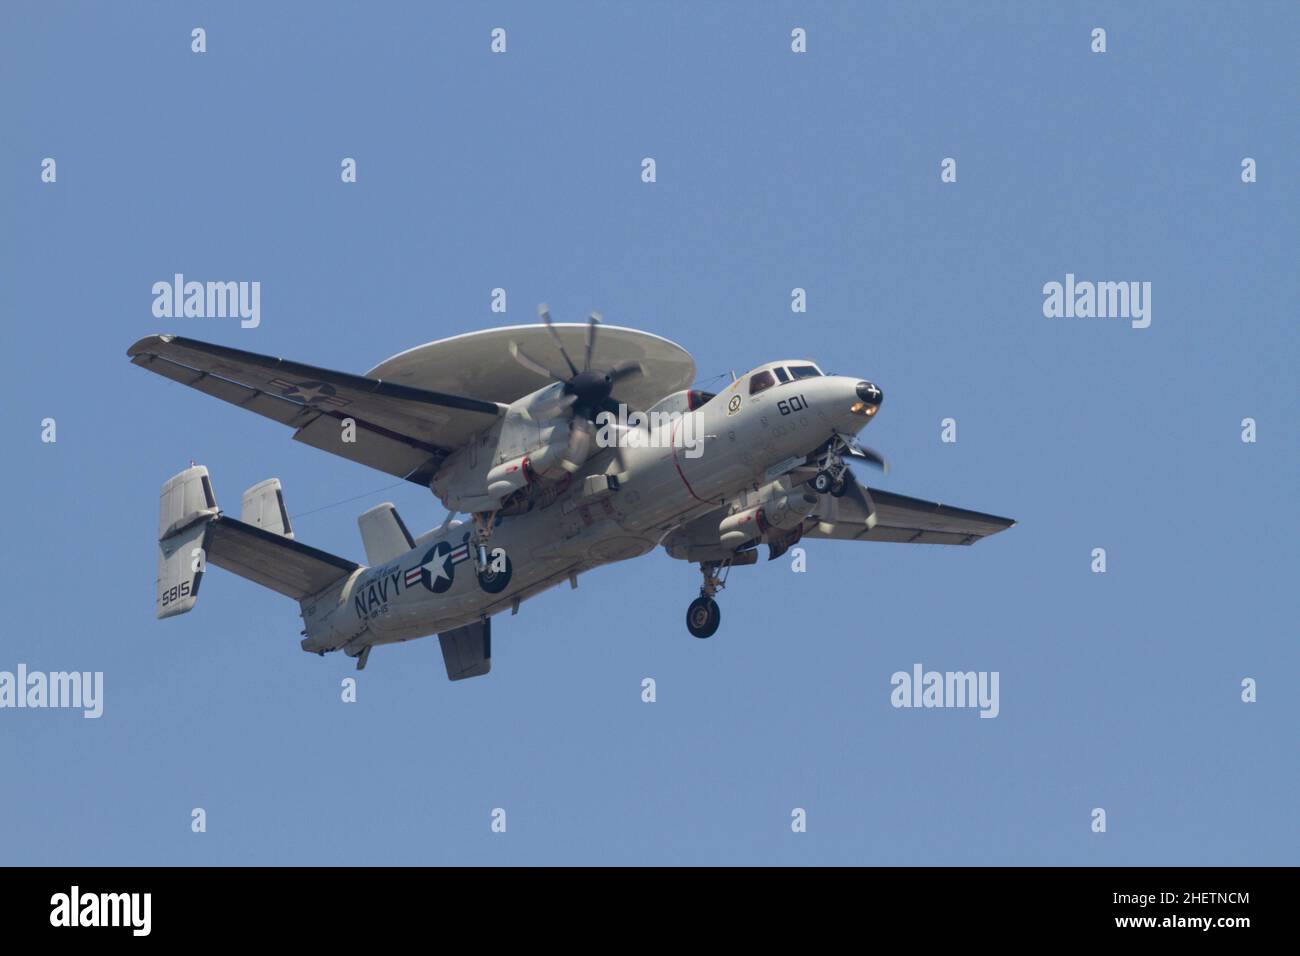 A Northrop Grumman E2 Hawkeye, early warning aircraft with Carrier Airborne Early Warning Squadron 115 (VAW-115), also known as the 'Liberty Bells' flying near Naval Air Facility, Atsugi airbase in Kanagawa, Japan. Stock Photo